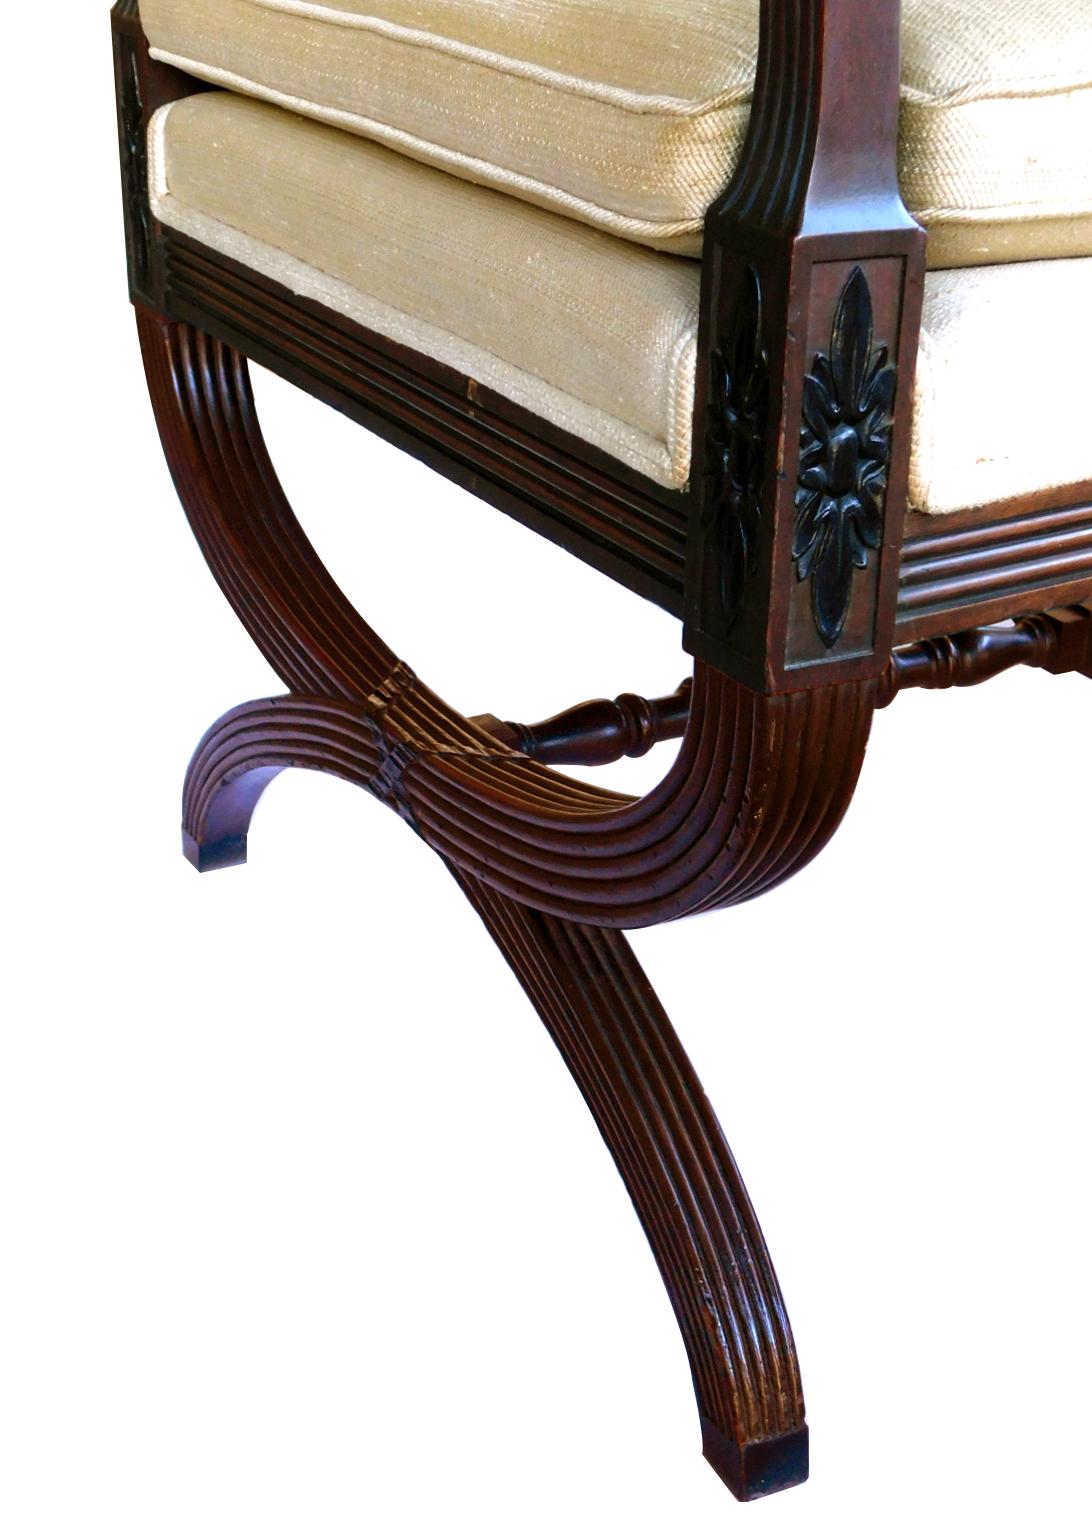 The open back with carved Greek Key rail above reeded downscrolled arms with foliate carving; all raised on Curule form legs joined by turned stretchers.